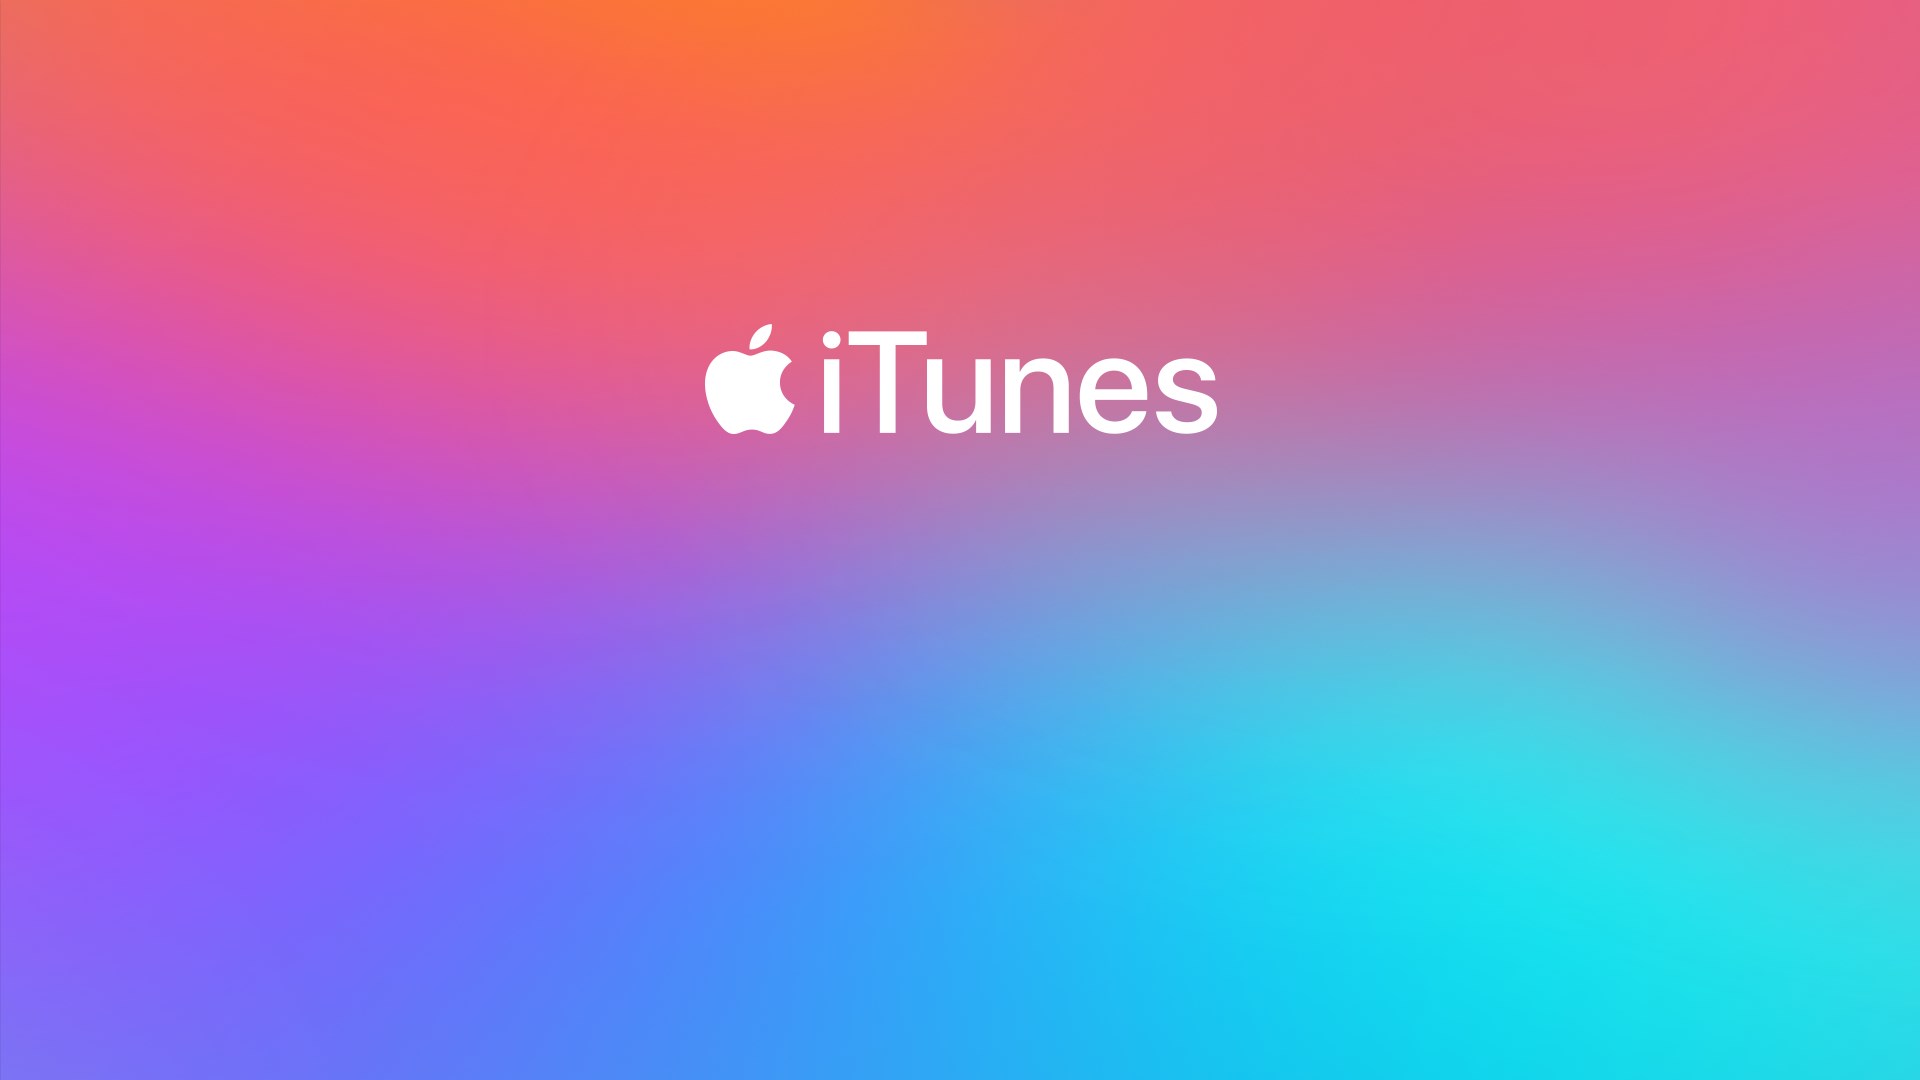 Brief Introduction to iTunes